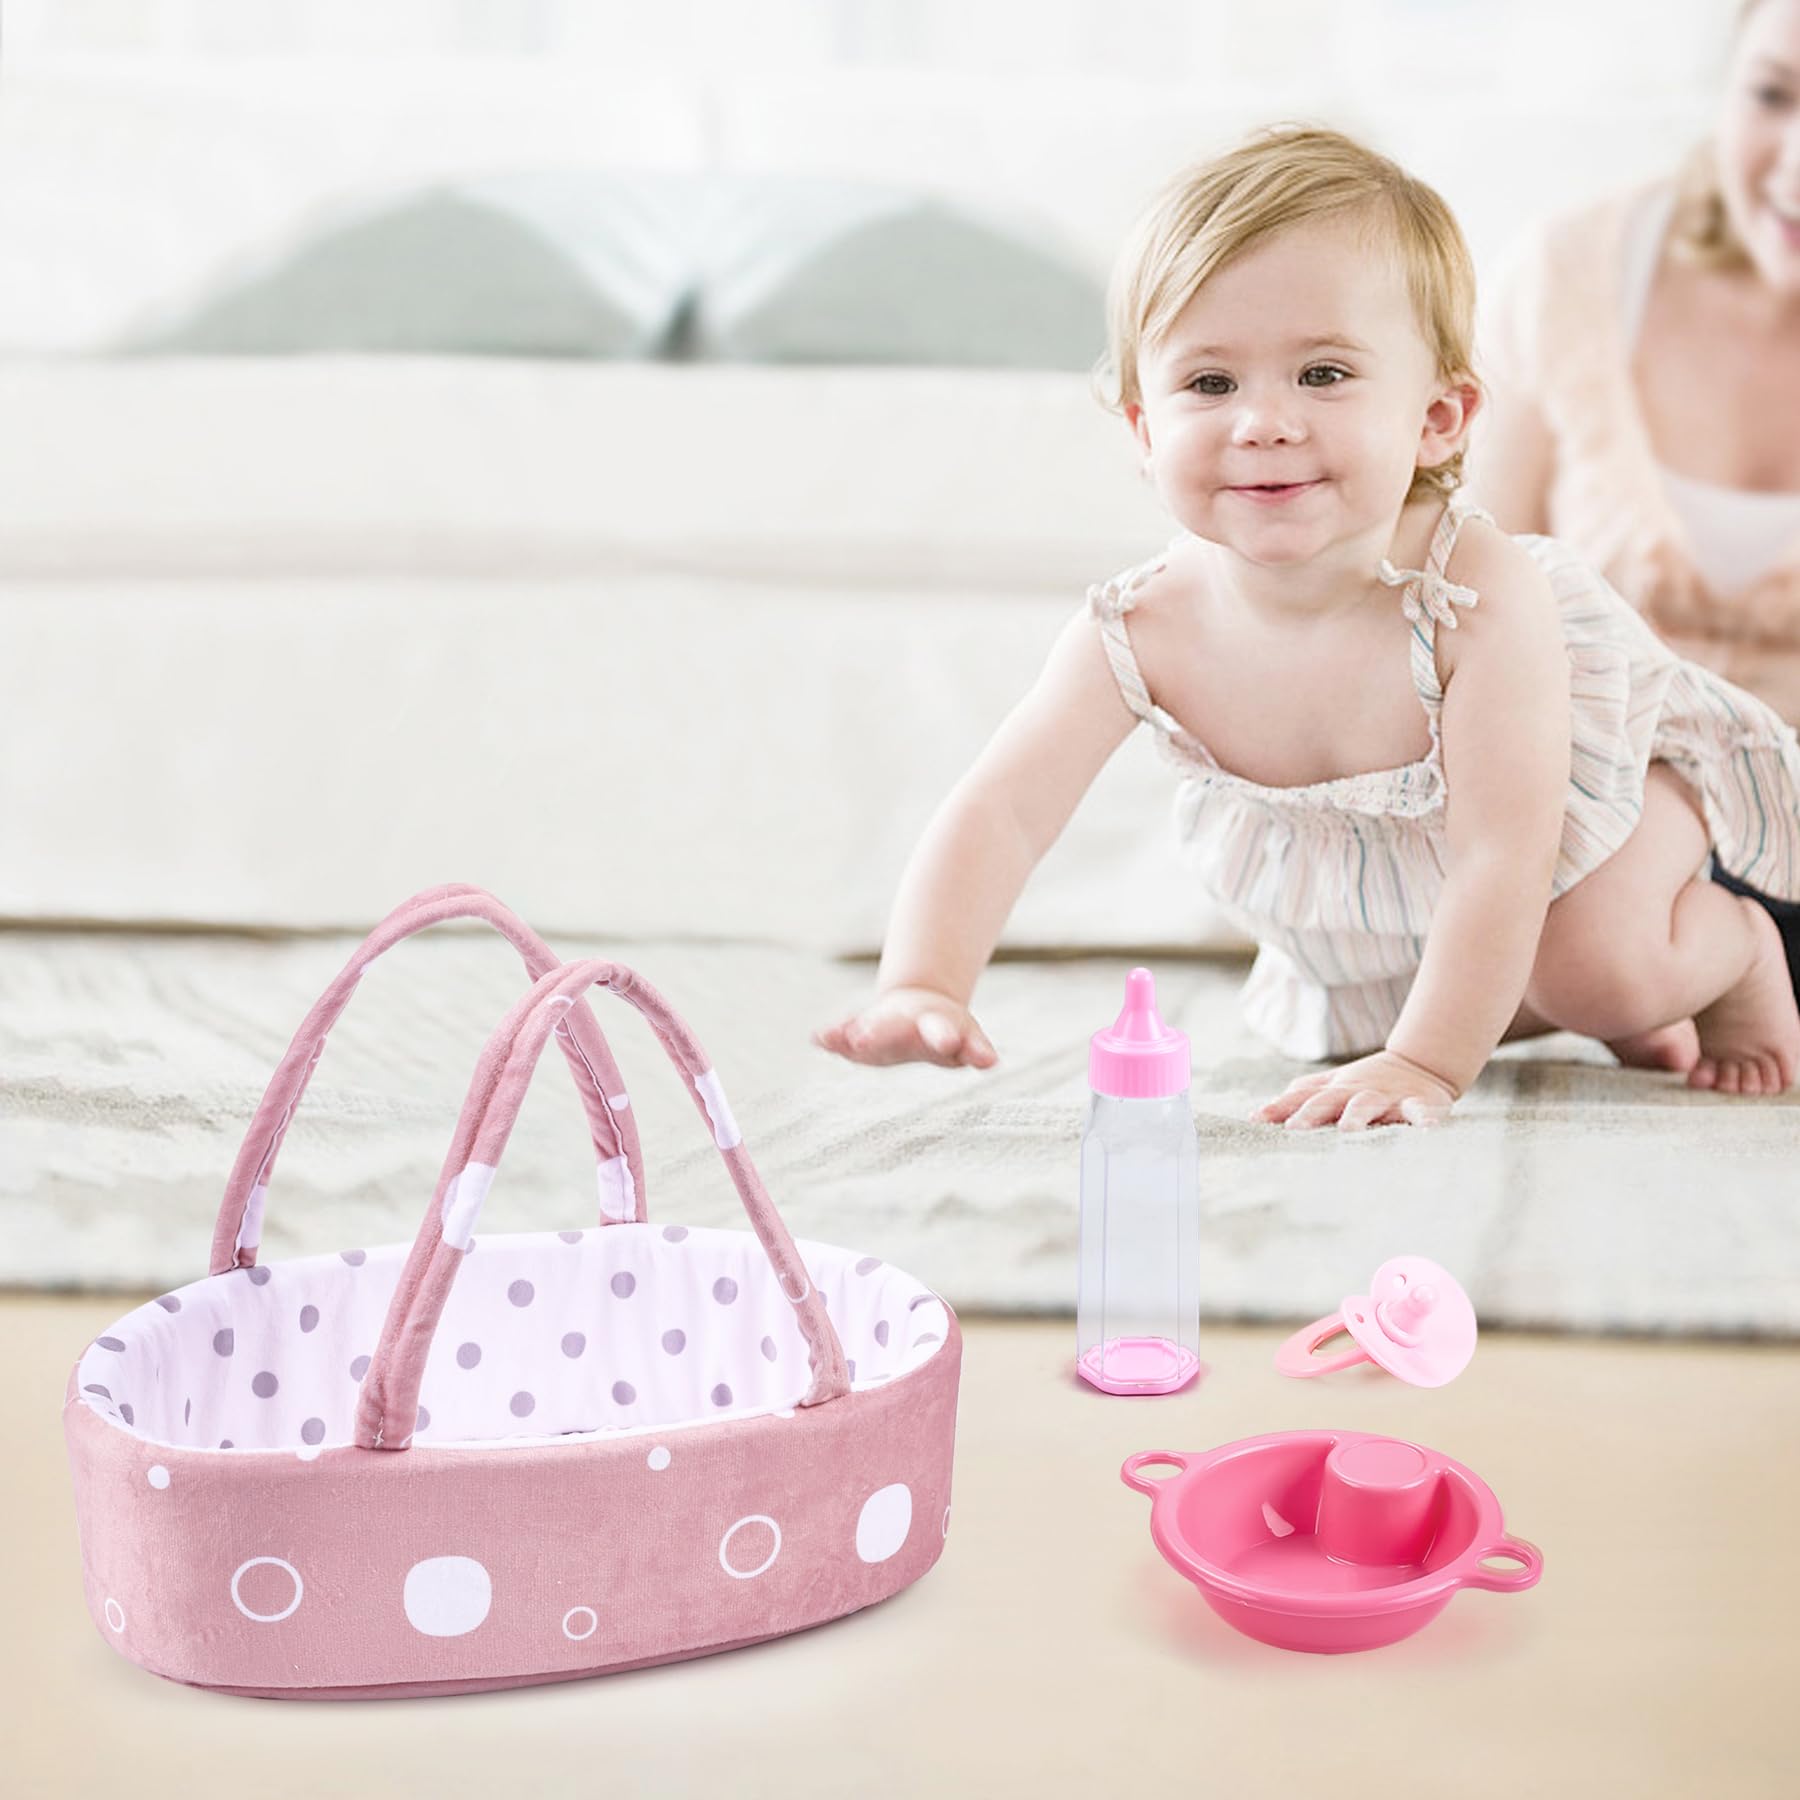 Enjoyin 8 Pcs Baby Doll Accessories Set Includes Feeding Bottle, Pacifier, Blanket, Pillow, Tablewares and Bassinet Carrier for 9'' to 12'' Dolls